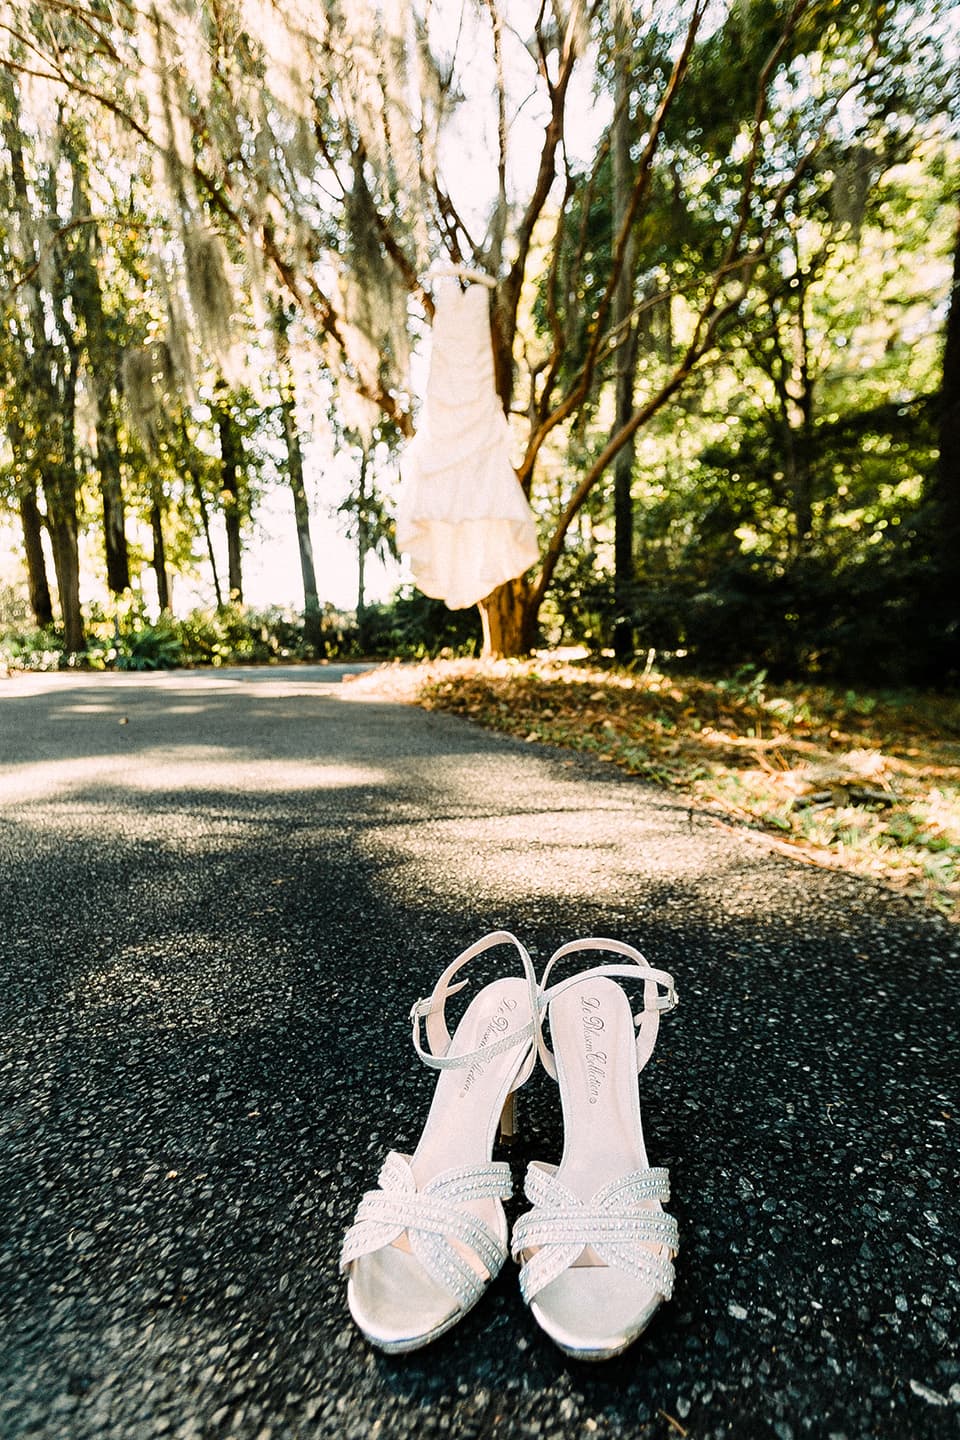 brides shoes are displayed while her dress hangs in a tree